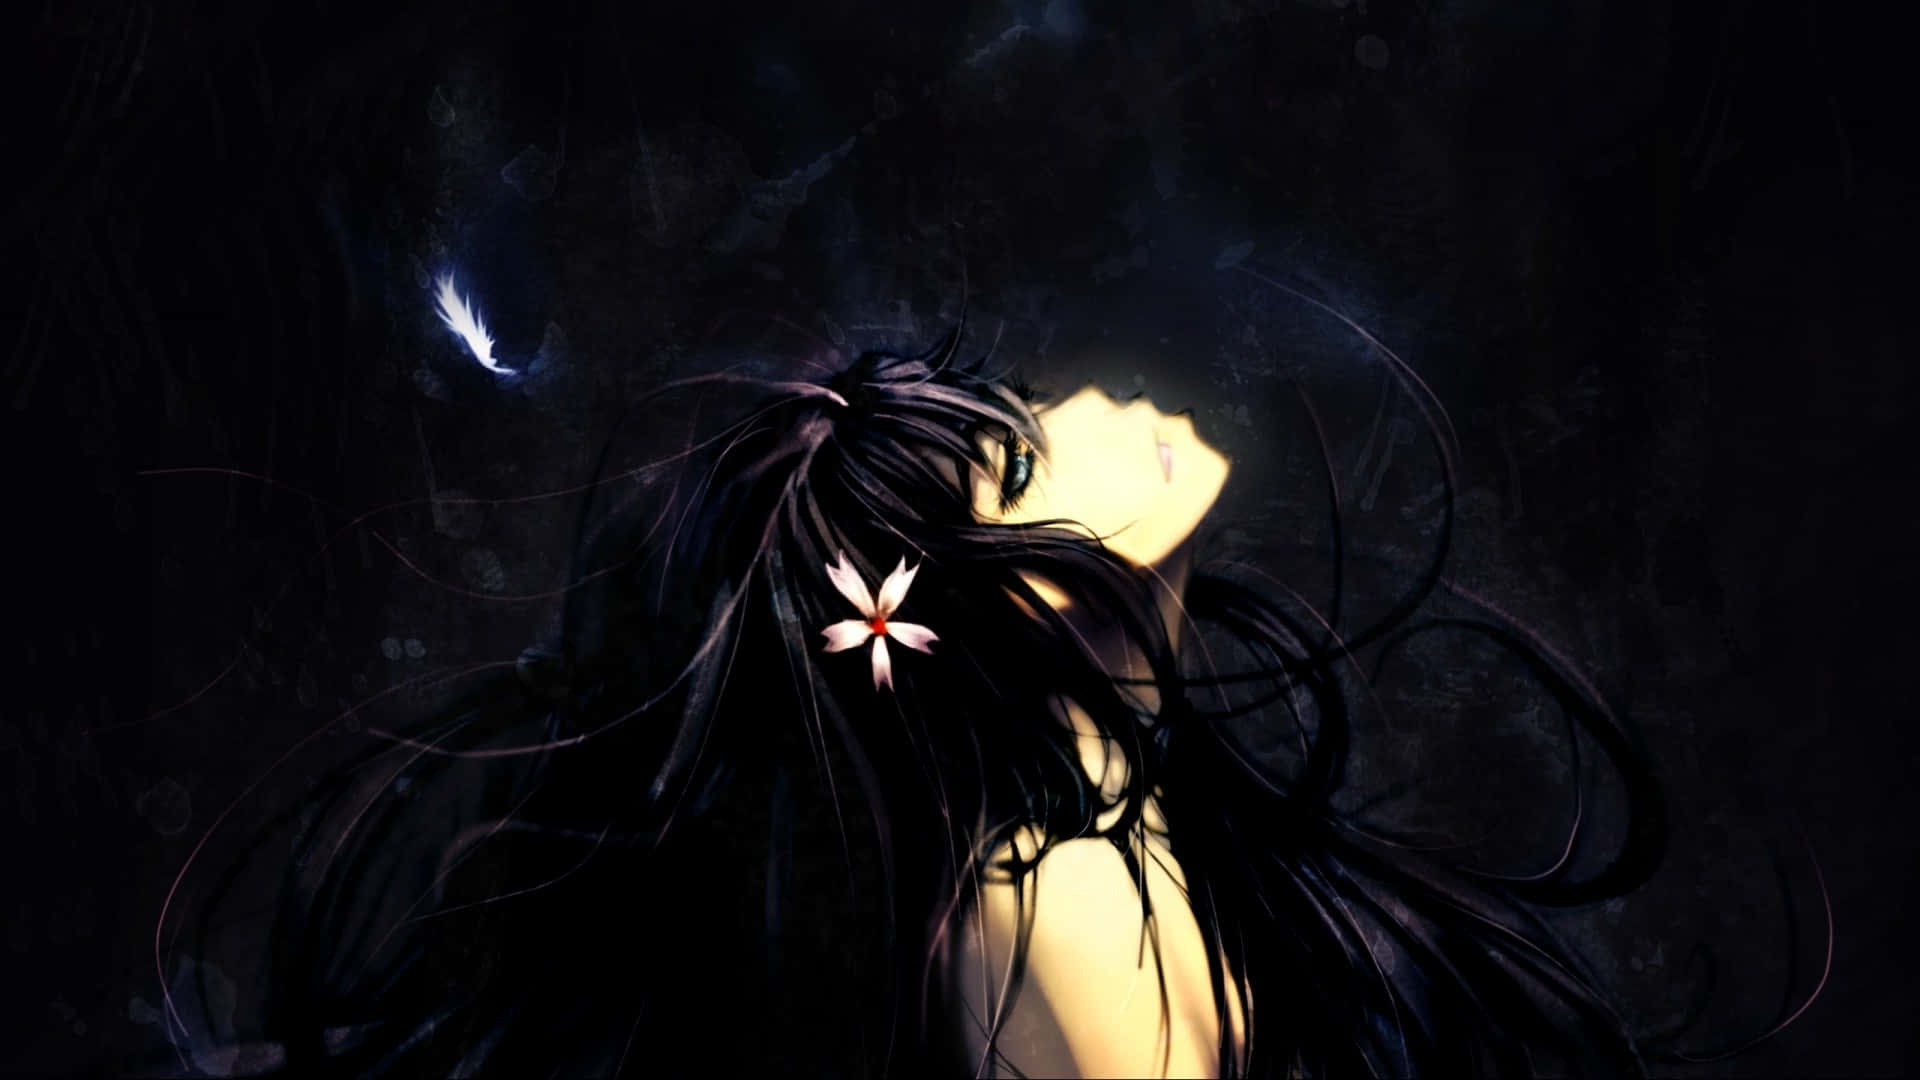 Mysterious dark anime girl gazing into the unknown. Wallpaper